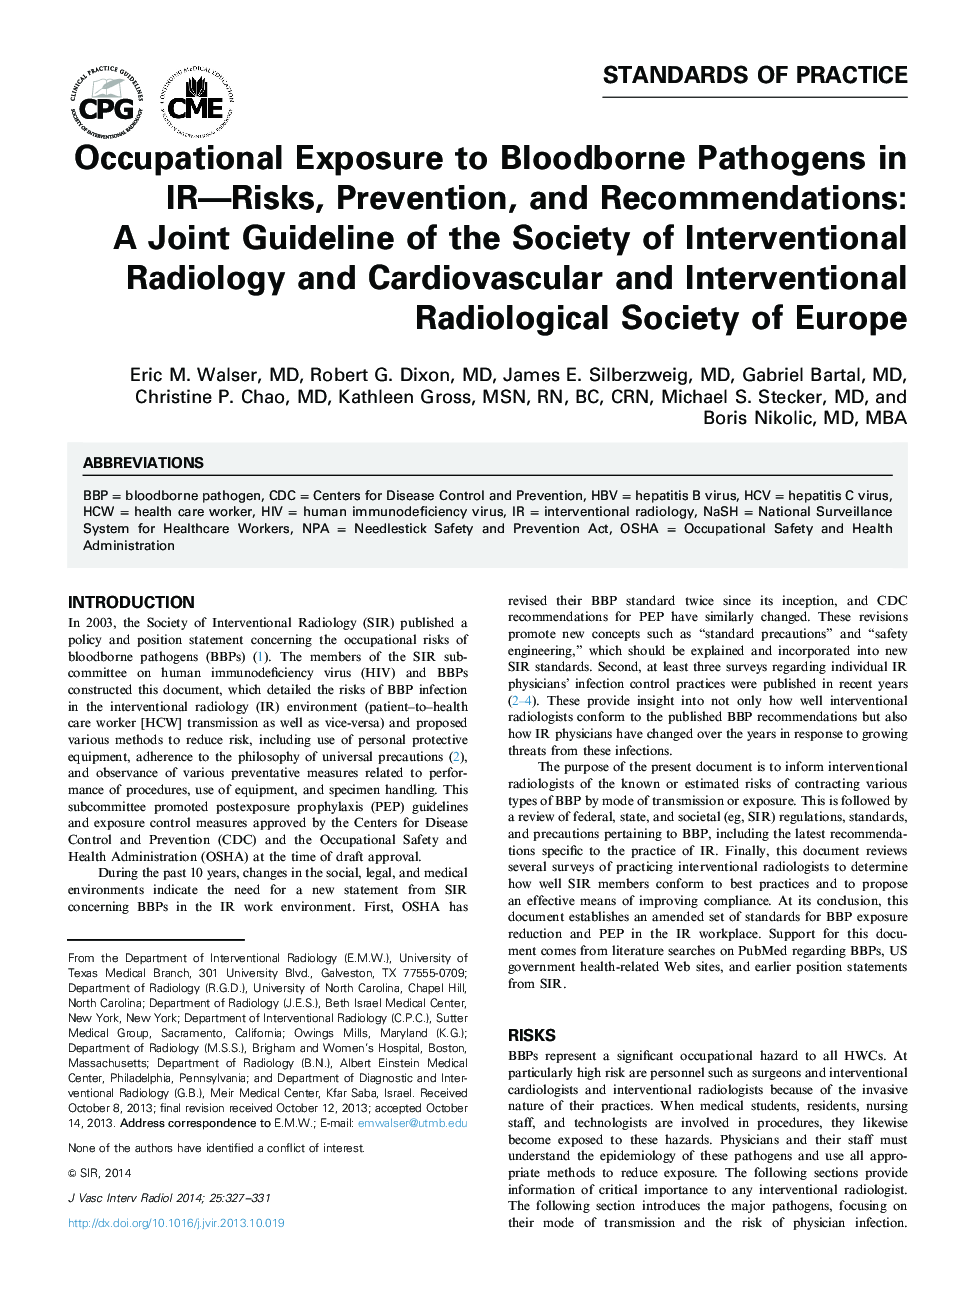 Occupational Exposure to Bloodborne Pathogens in IR-Risks, Prevention, and Recommendations: A Joint Guideline of the Society of Interventional Radiology and Cardiovascular and Interventional Radiological Society of Europe